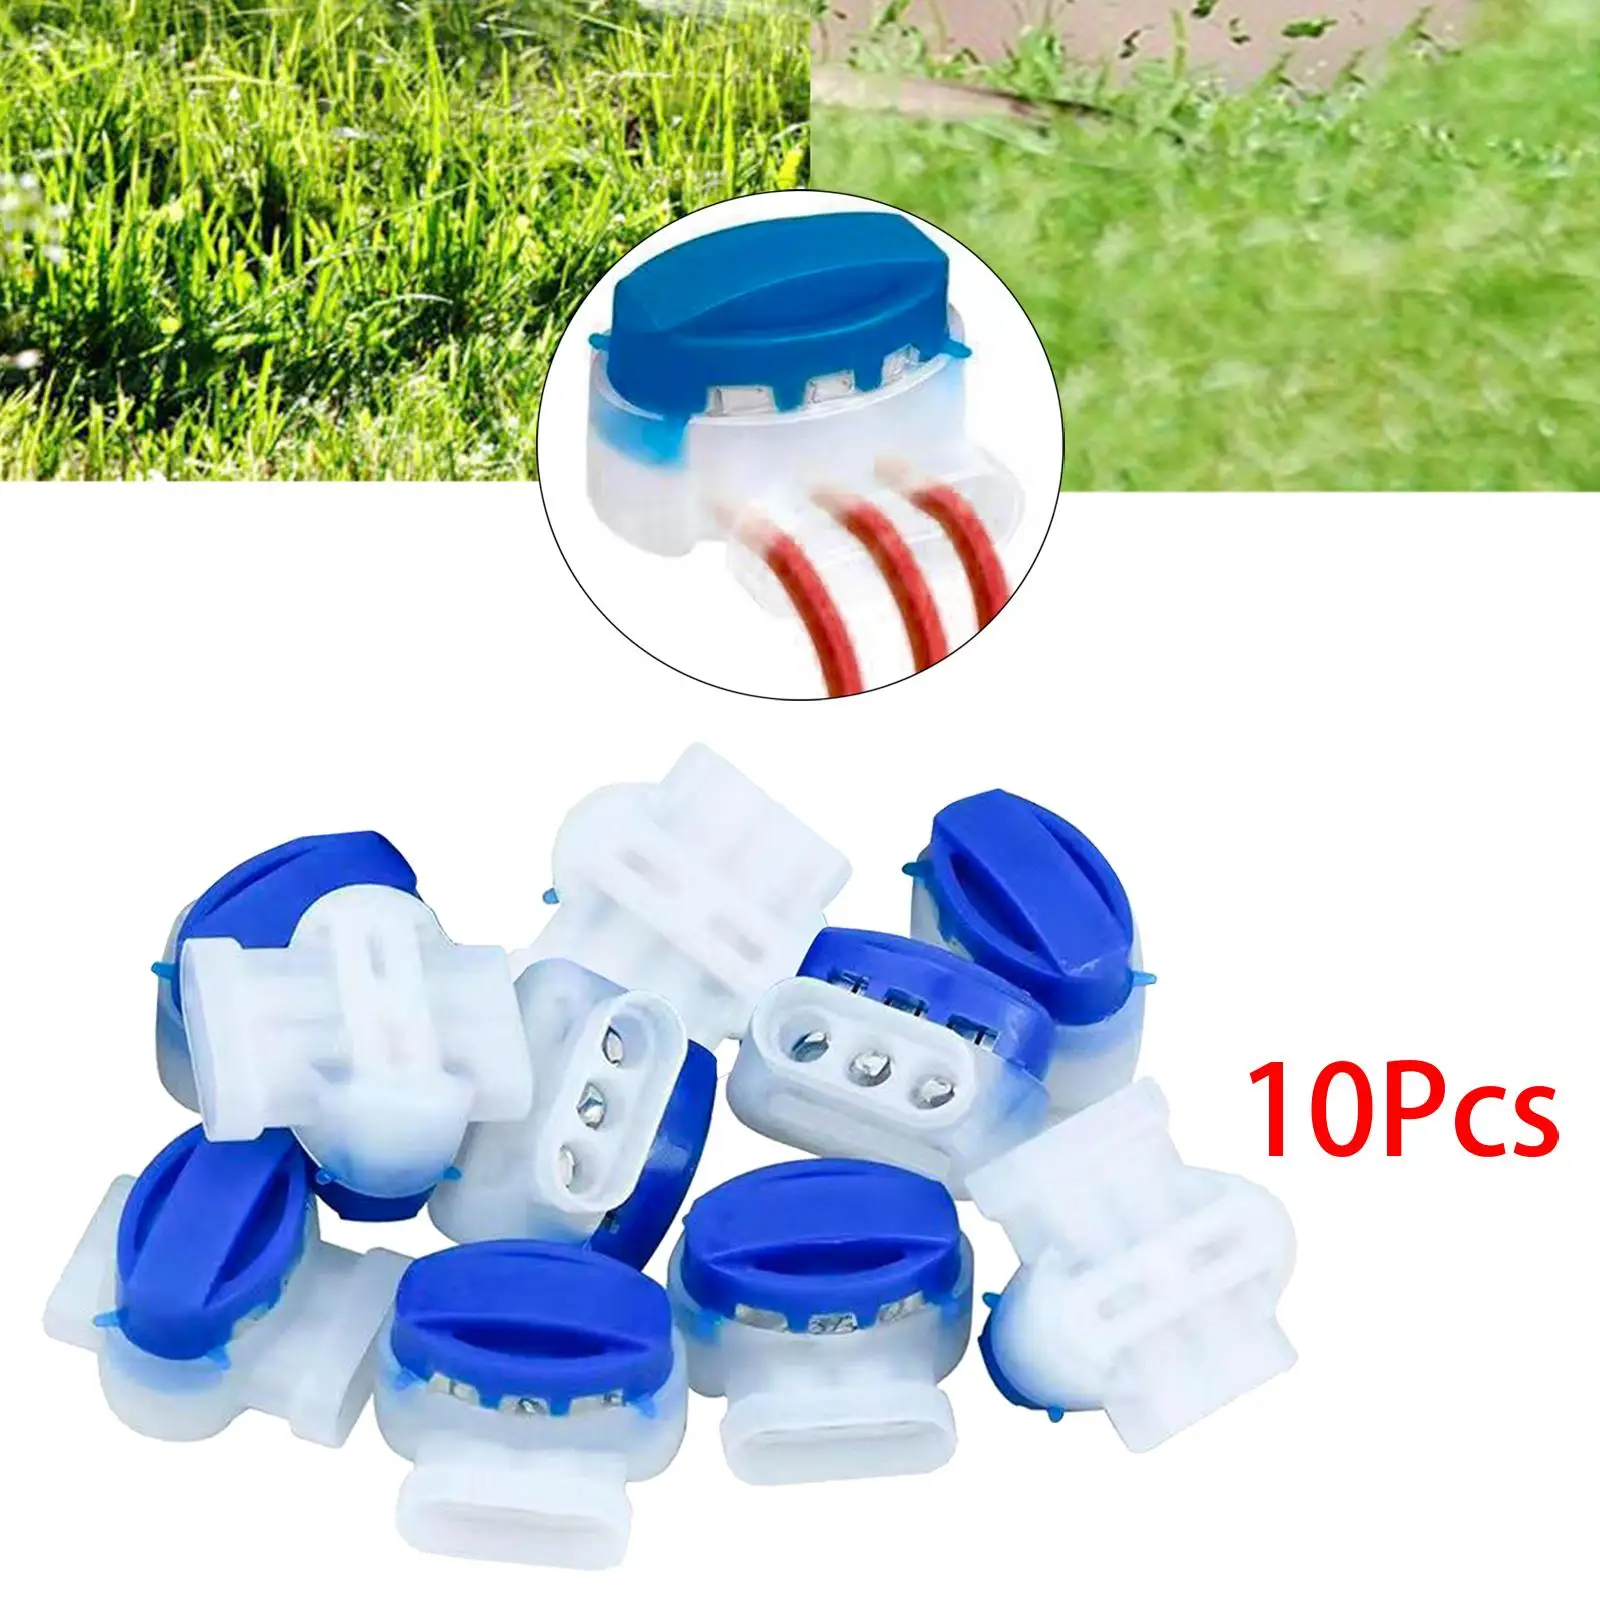 10x 3 Way Wire Connectors IDC 314-box Replacement Parts Waterproof for Robotic Lawn Mowers Irrigation System 22-14 AWG Cables